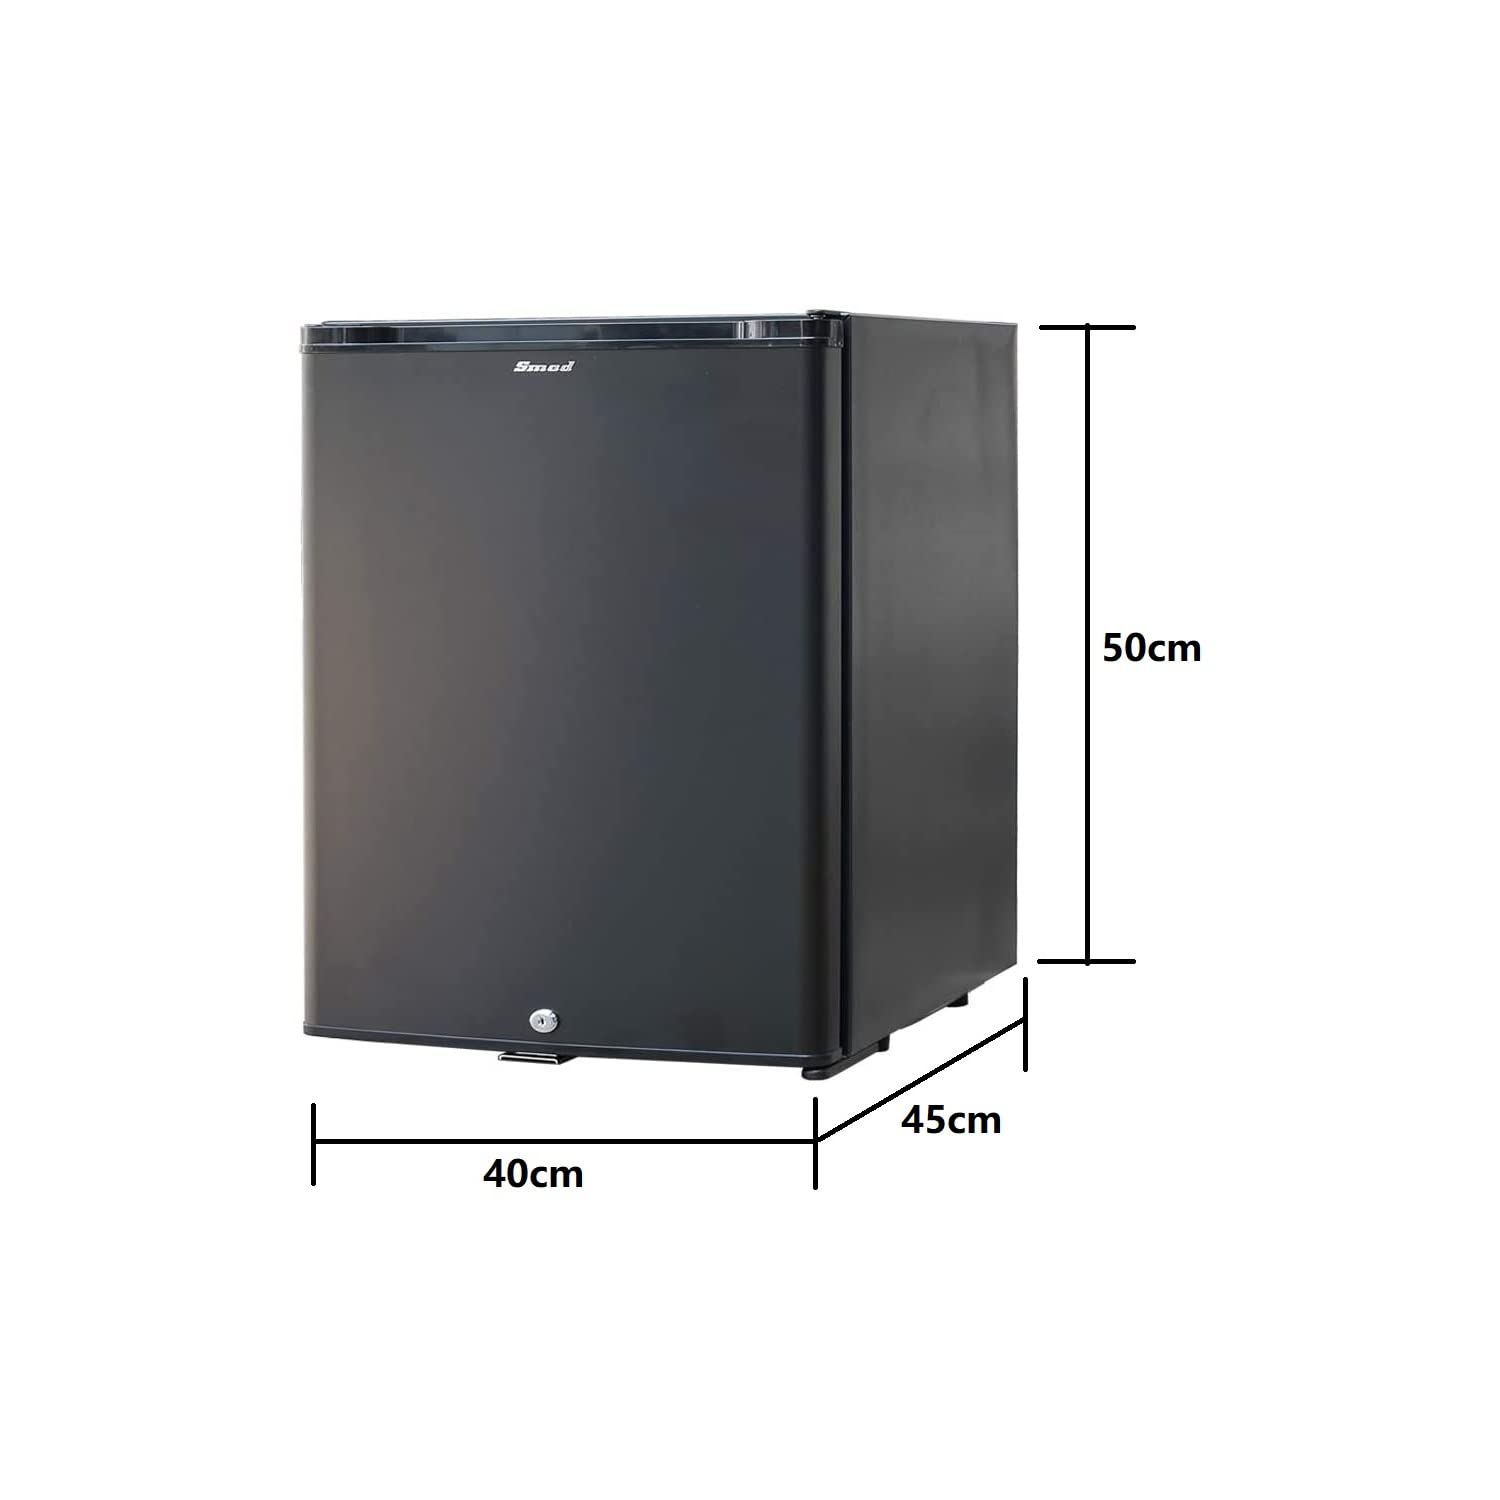 SMAD Mini Fridge - 30L Compact and Versatile Absorption Refrigerator with Lock for Home, Hotel, RV, Camping - AC/DC, 0-10℃, Quiet Cooling, Eco-Friendly, Reversible Door